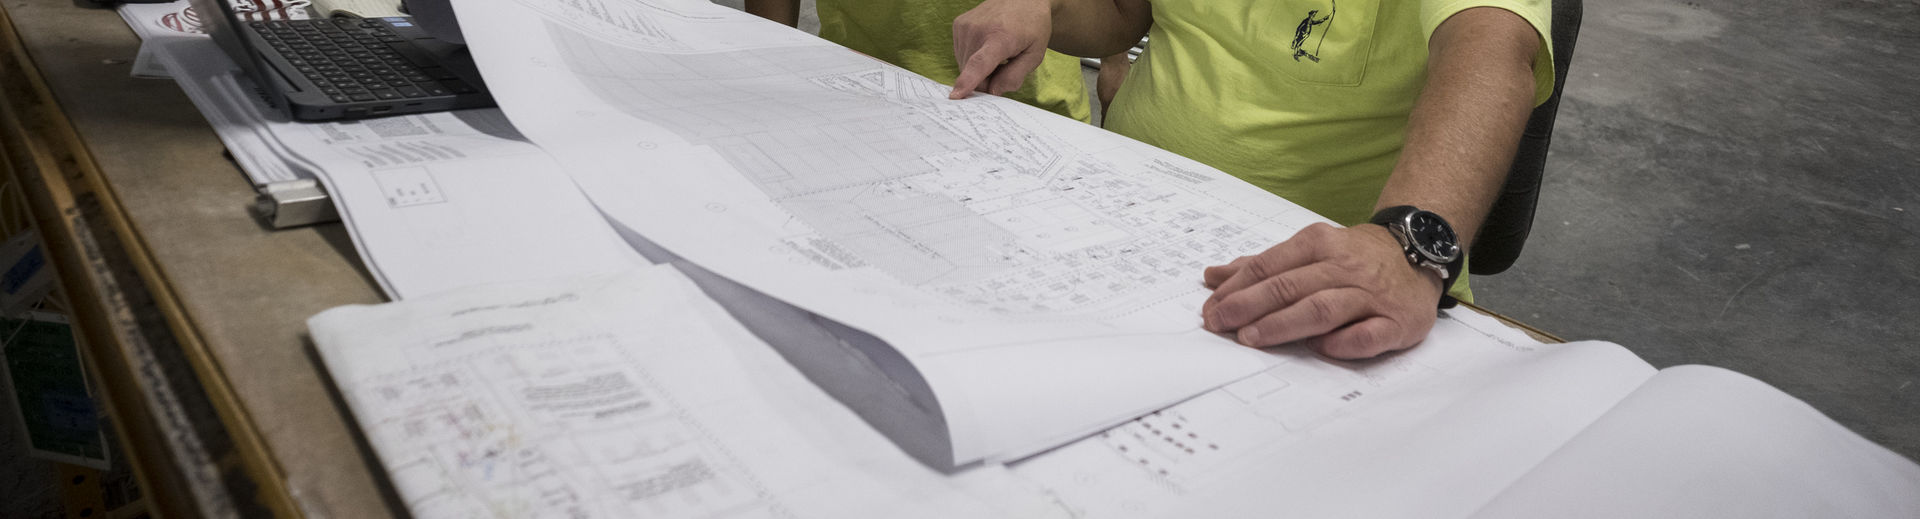 facilities workers reviewing a blueprint of a building. 